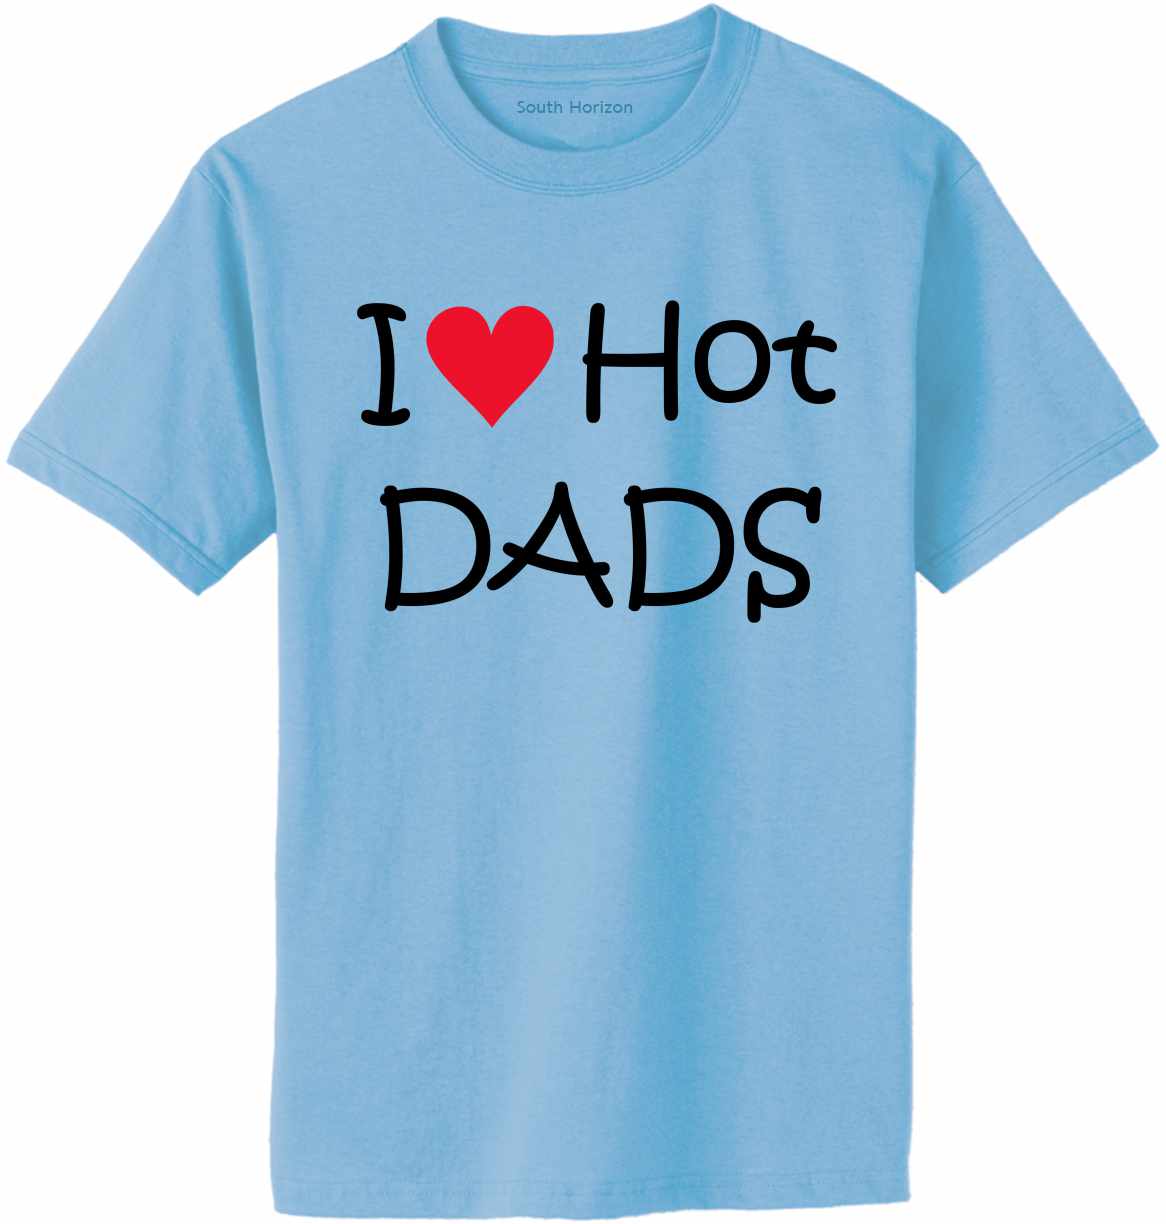 I Love Hot Dads on Adult T-Shirt